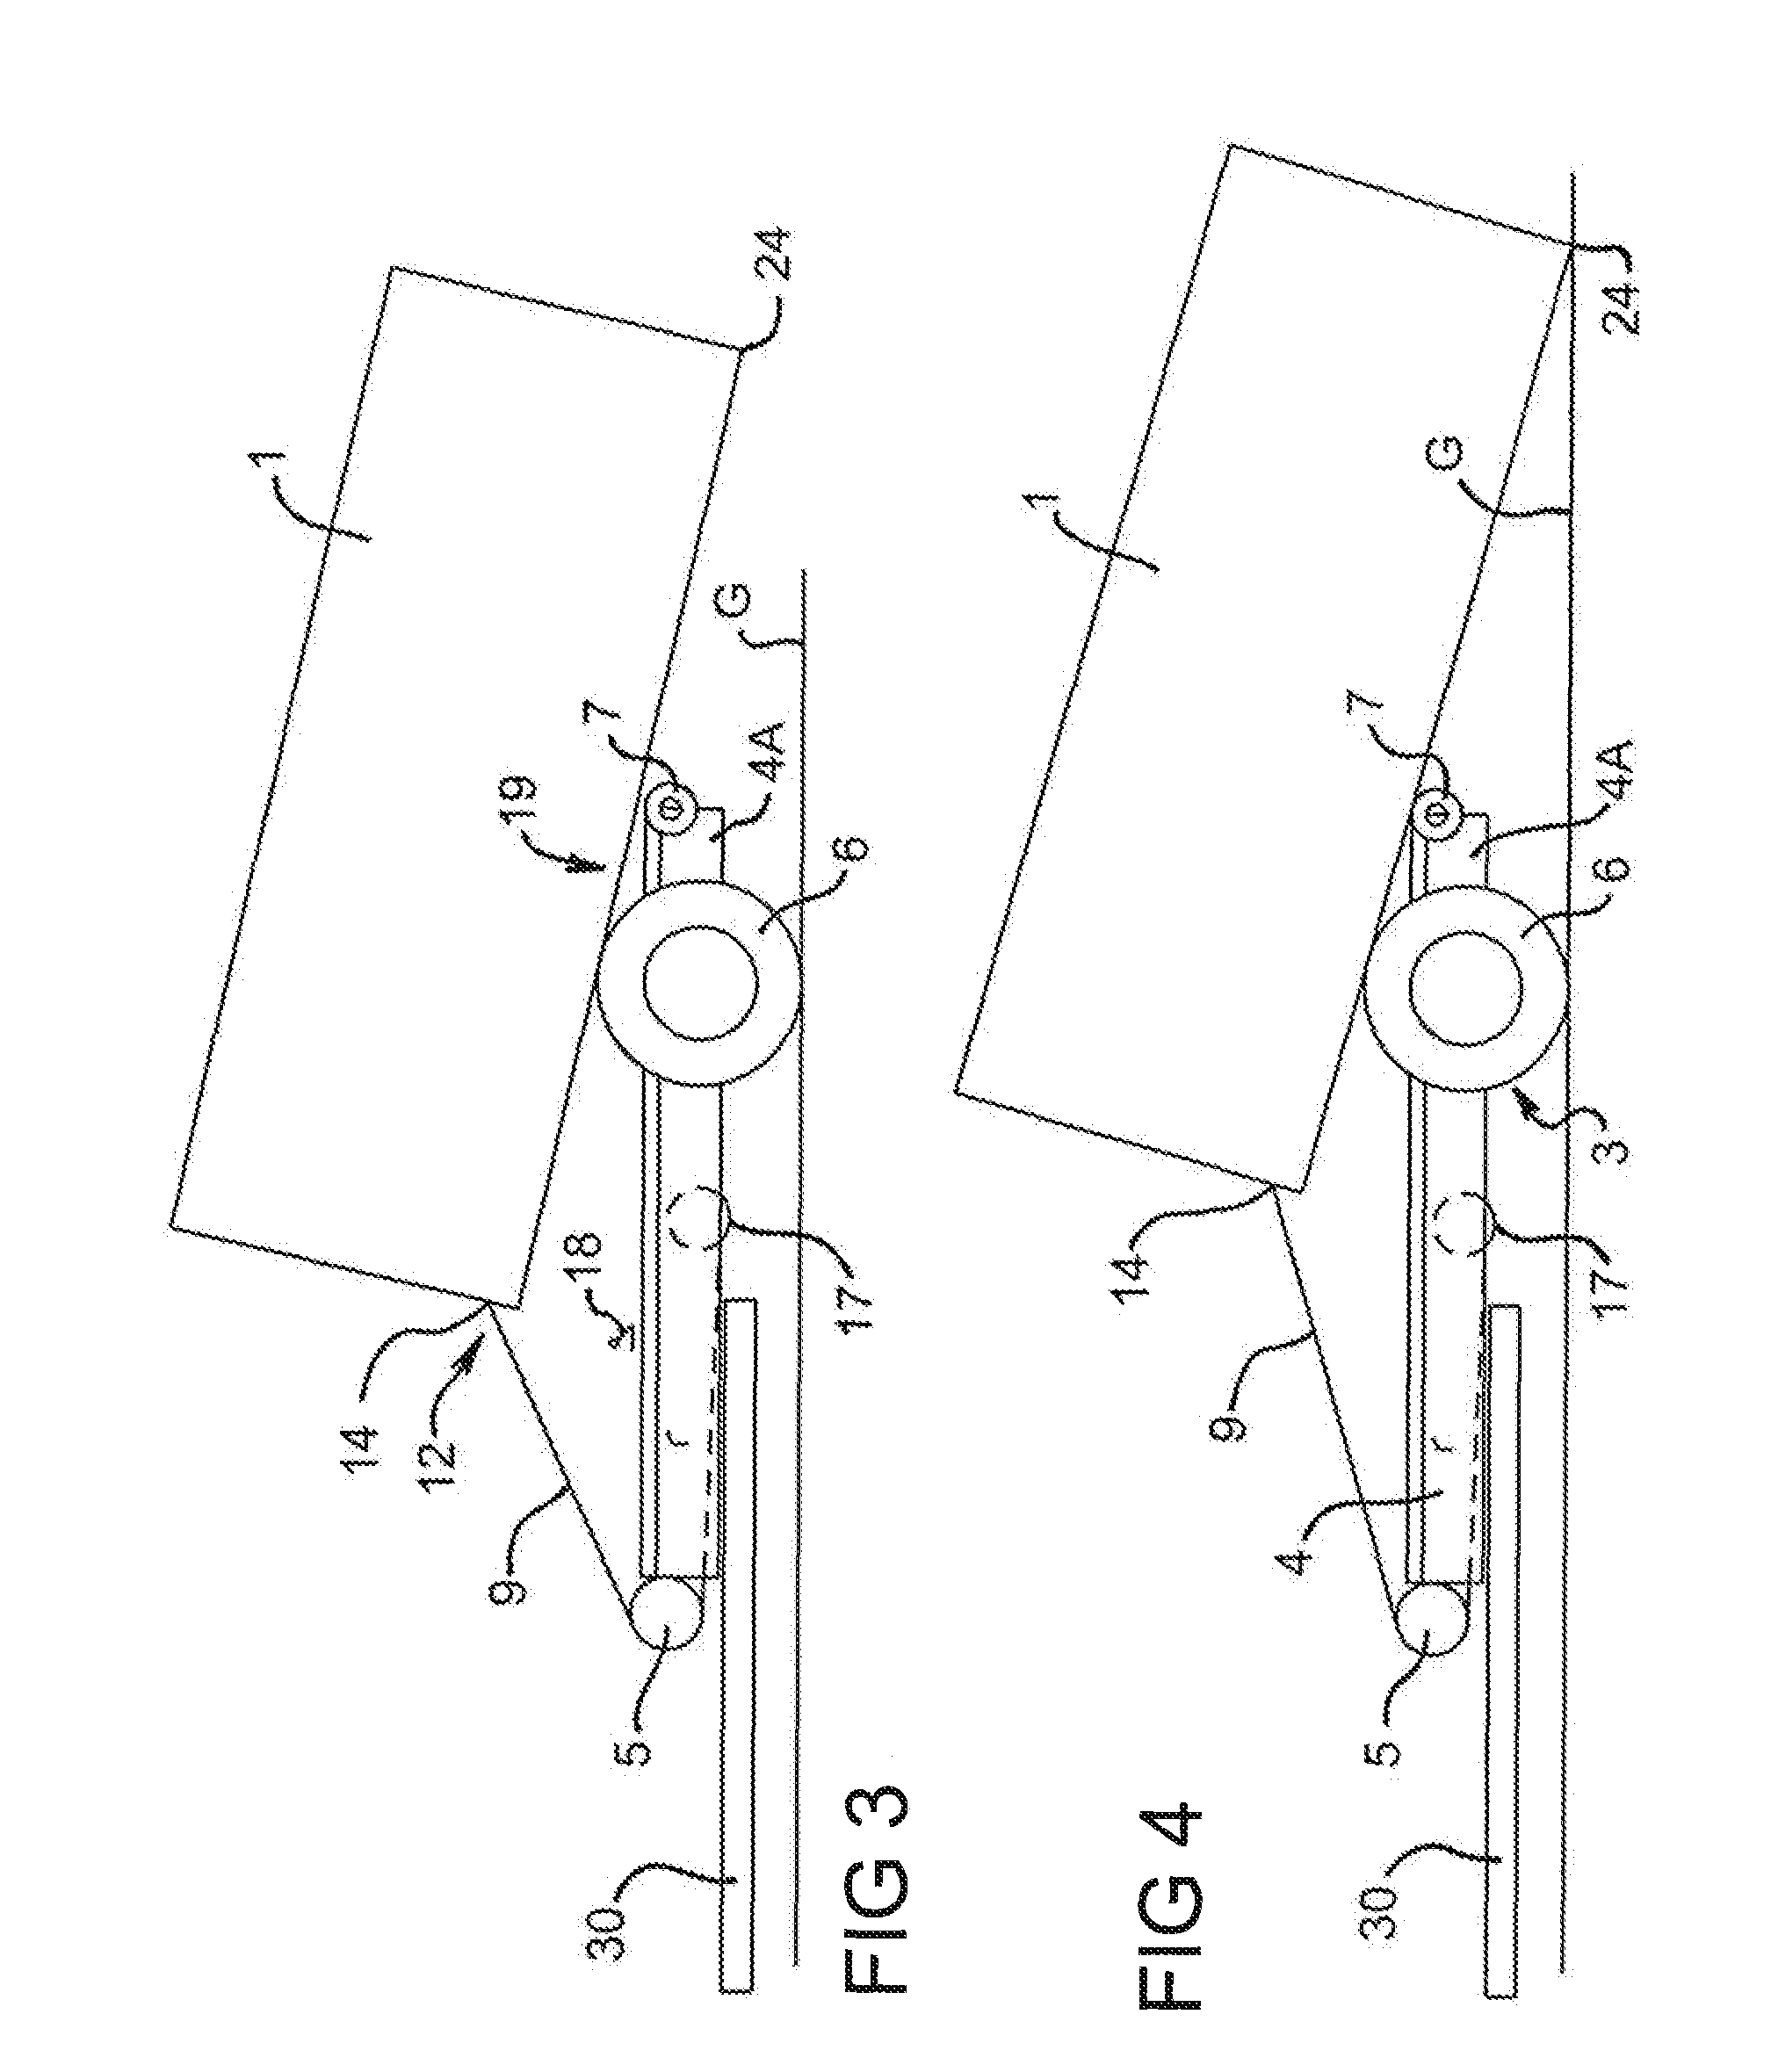 Loading and Unloading Arrangement for a Vehicle